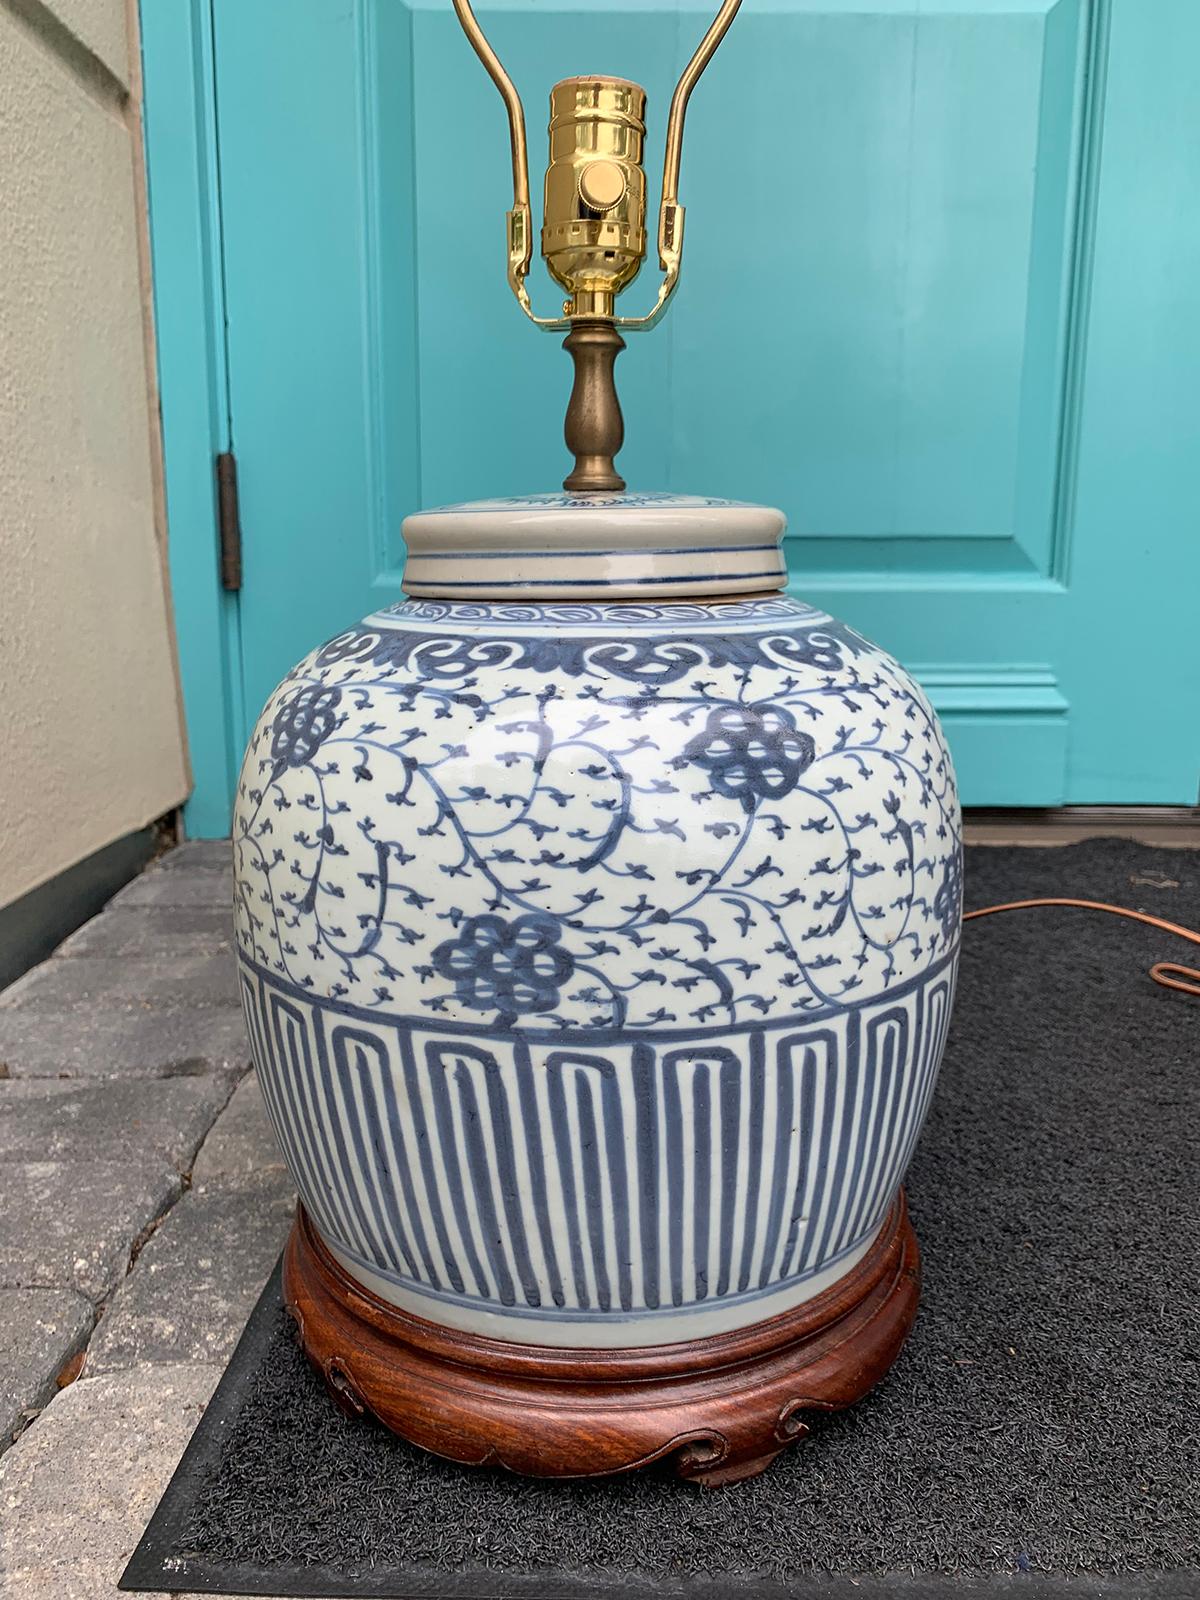 19th-20th Century Chinese Blue and White Covered Porcelain Jar as Lamp In Good Condition For Sale In Atlanta, GA